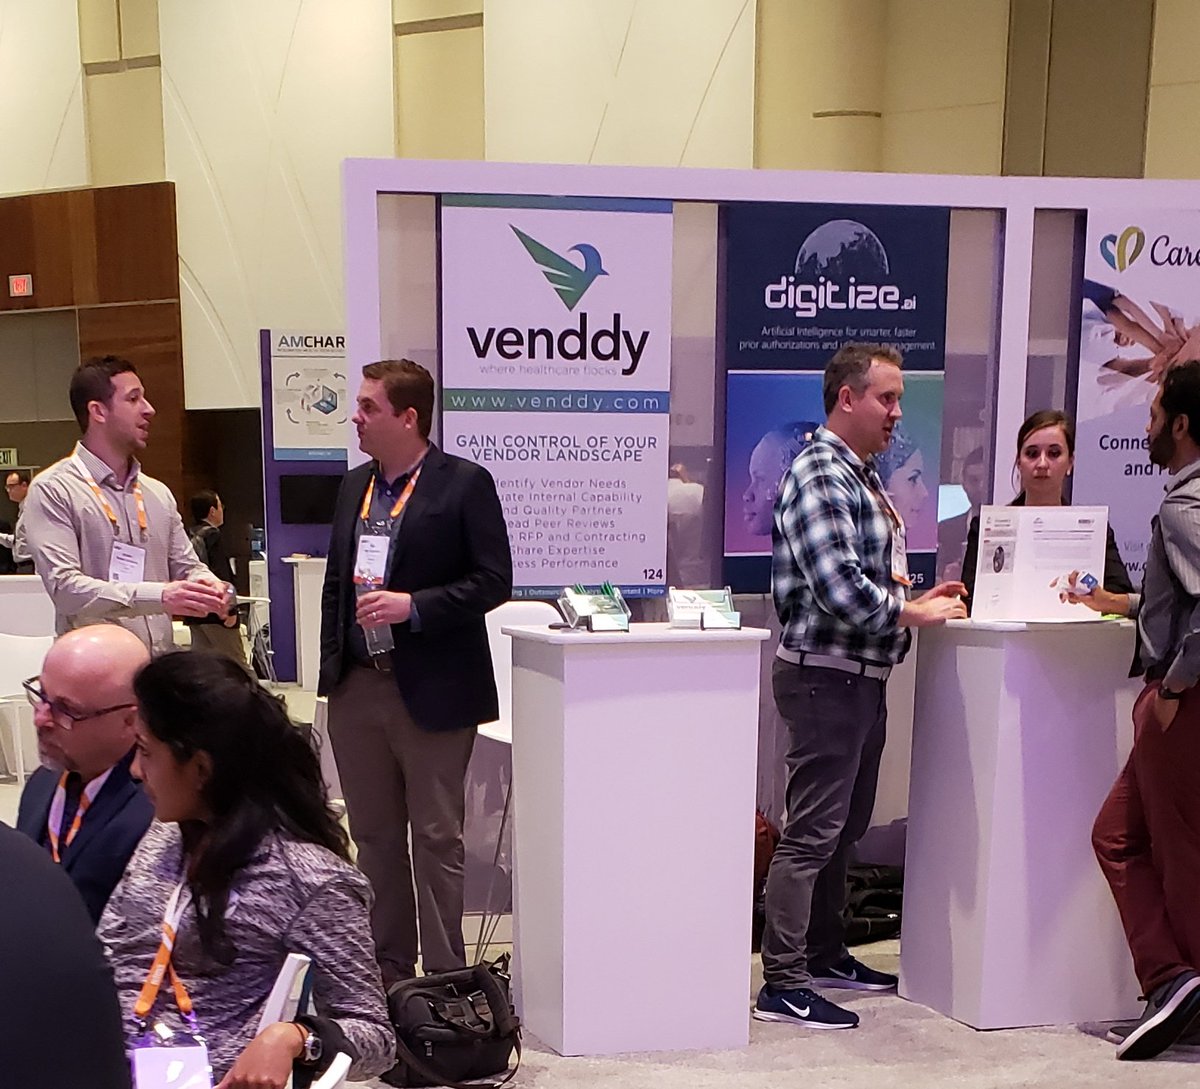 @venddyllc kiosk at #HIMMS19 is so hot right now! Lots of cool stuff happening in the #Innovation Live Pavilion! Stop by! #Aim2Innovate #VRM #iRFP #ReThinkRCM #pinksocks